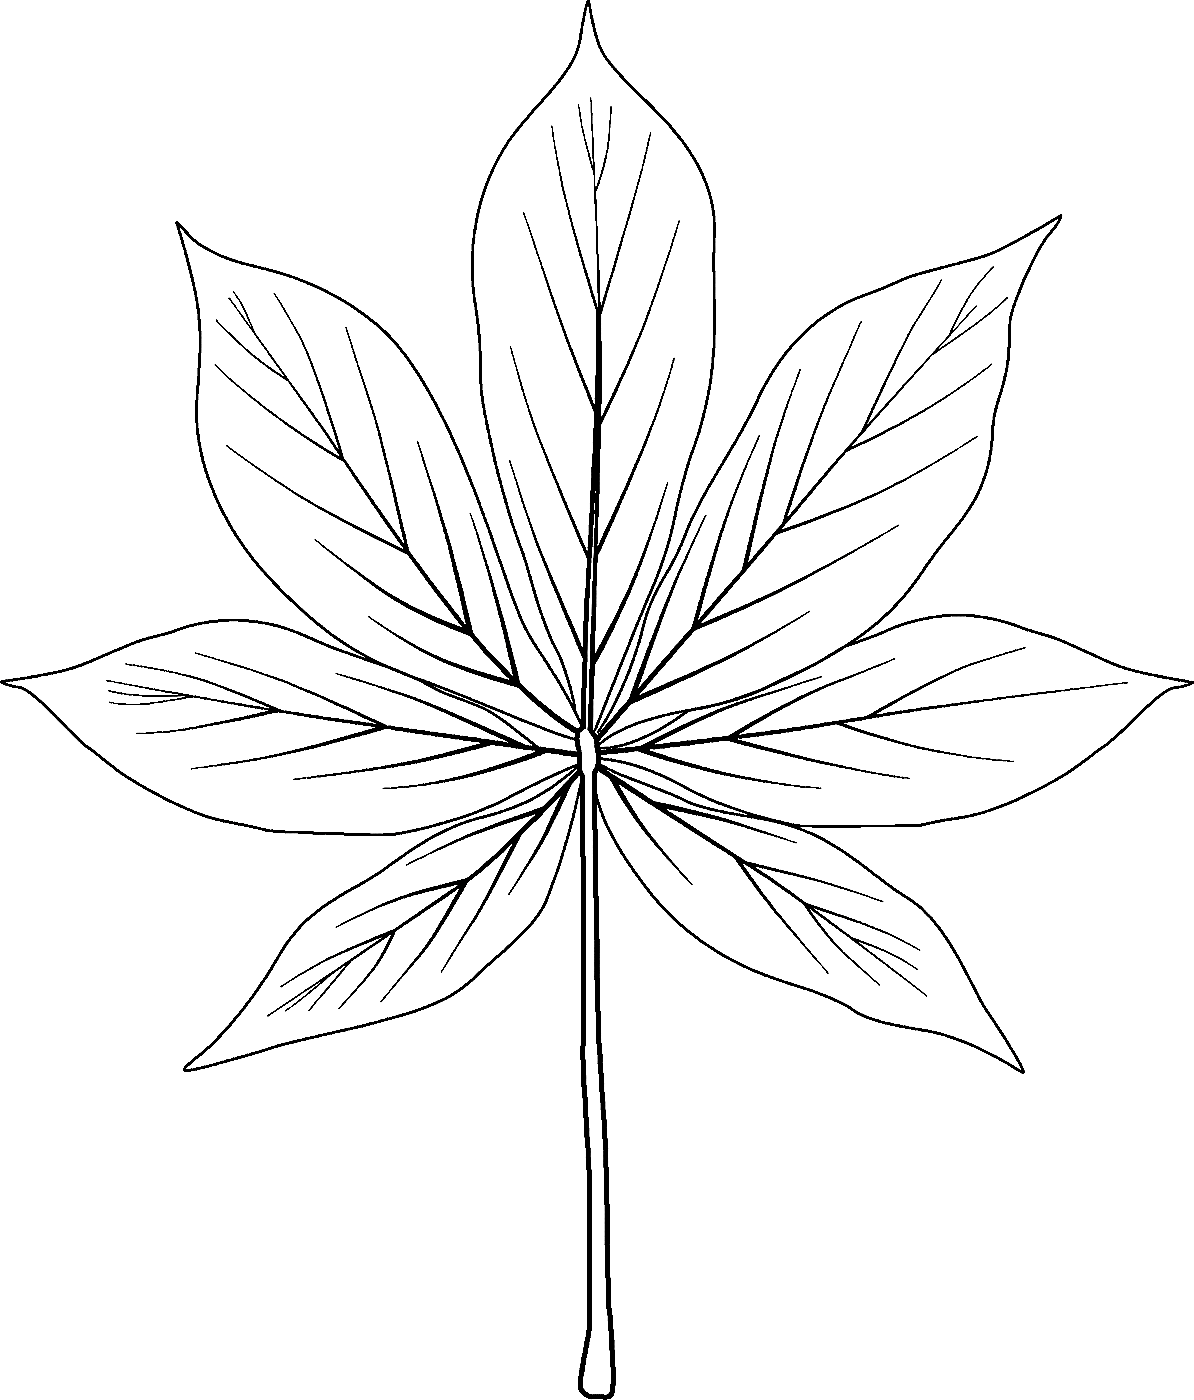 California Buckeye Leaf Coloring Pages